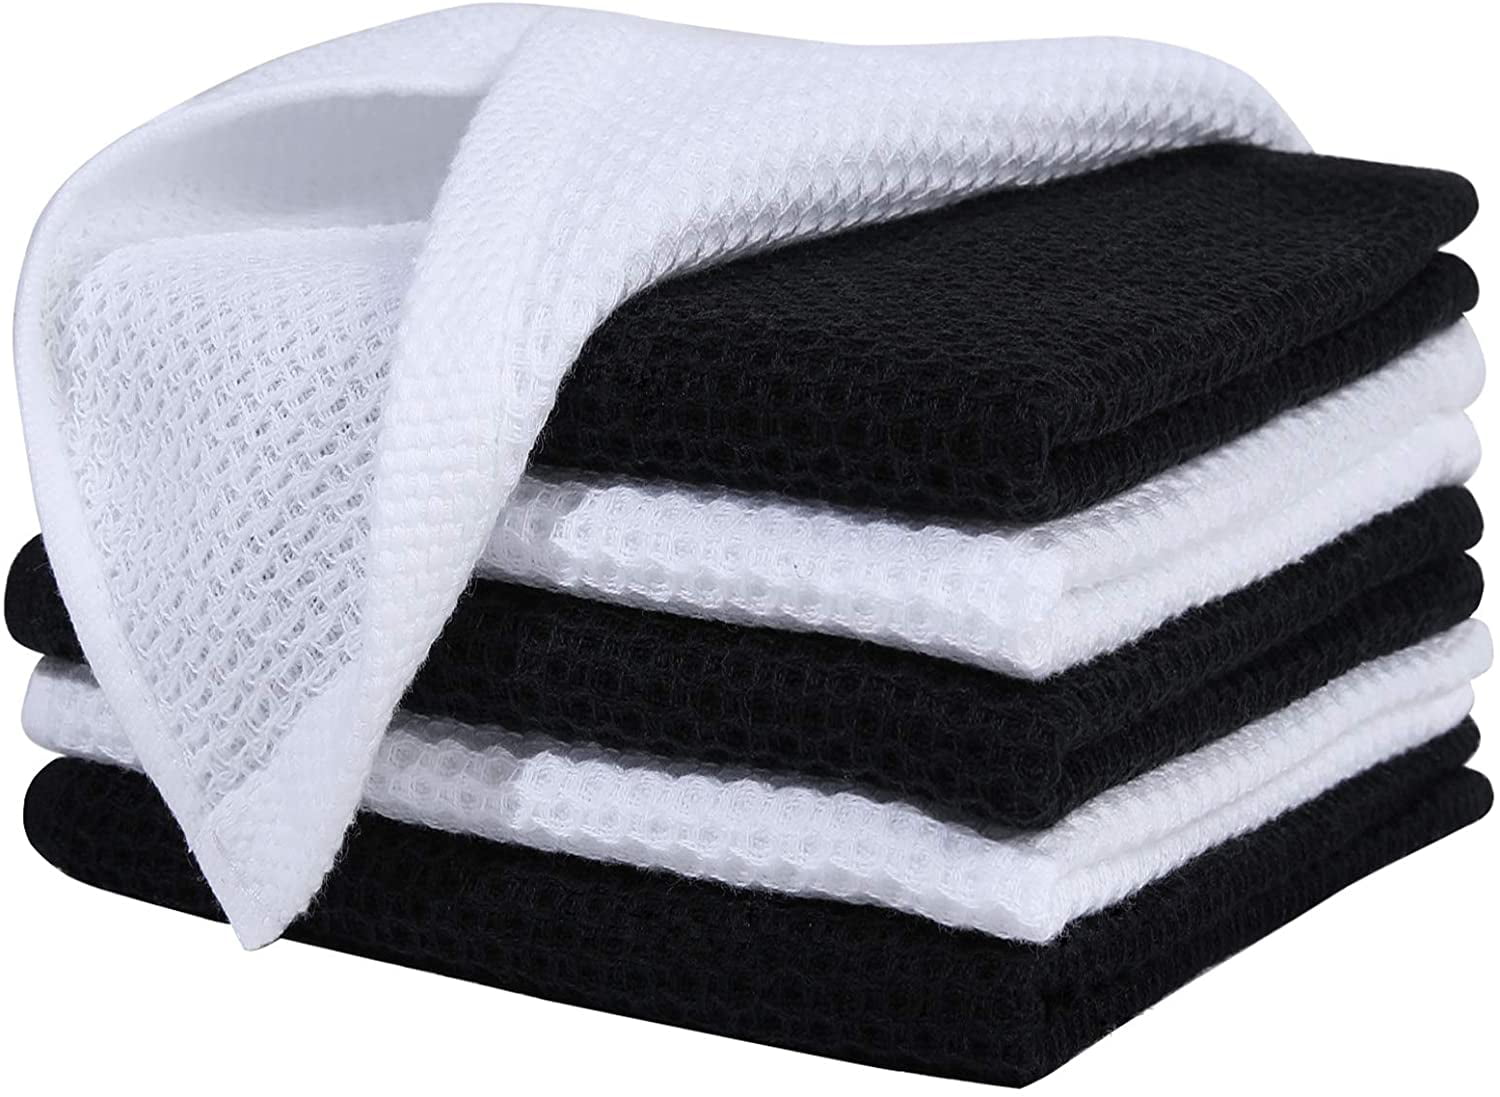  All Clad Premium Dish Cloths (6-Pack), 13 x 14, Highly  Absorbent, Super Soft, Long-Lasting Terry-Loop Weave 100% Turkish Combed  Cotton Bar Towels for Washing Dishes, Titanium : Everything Else